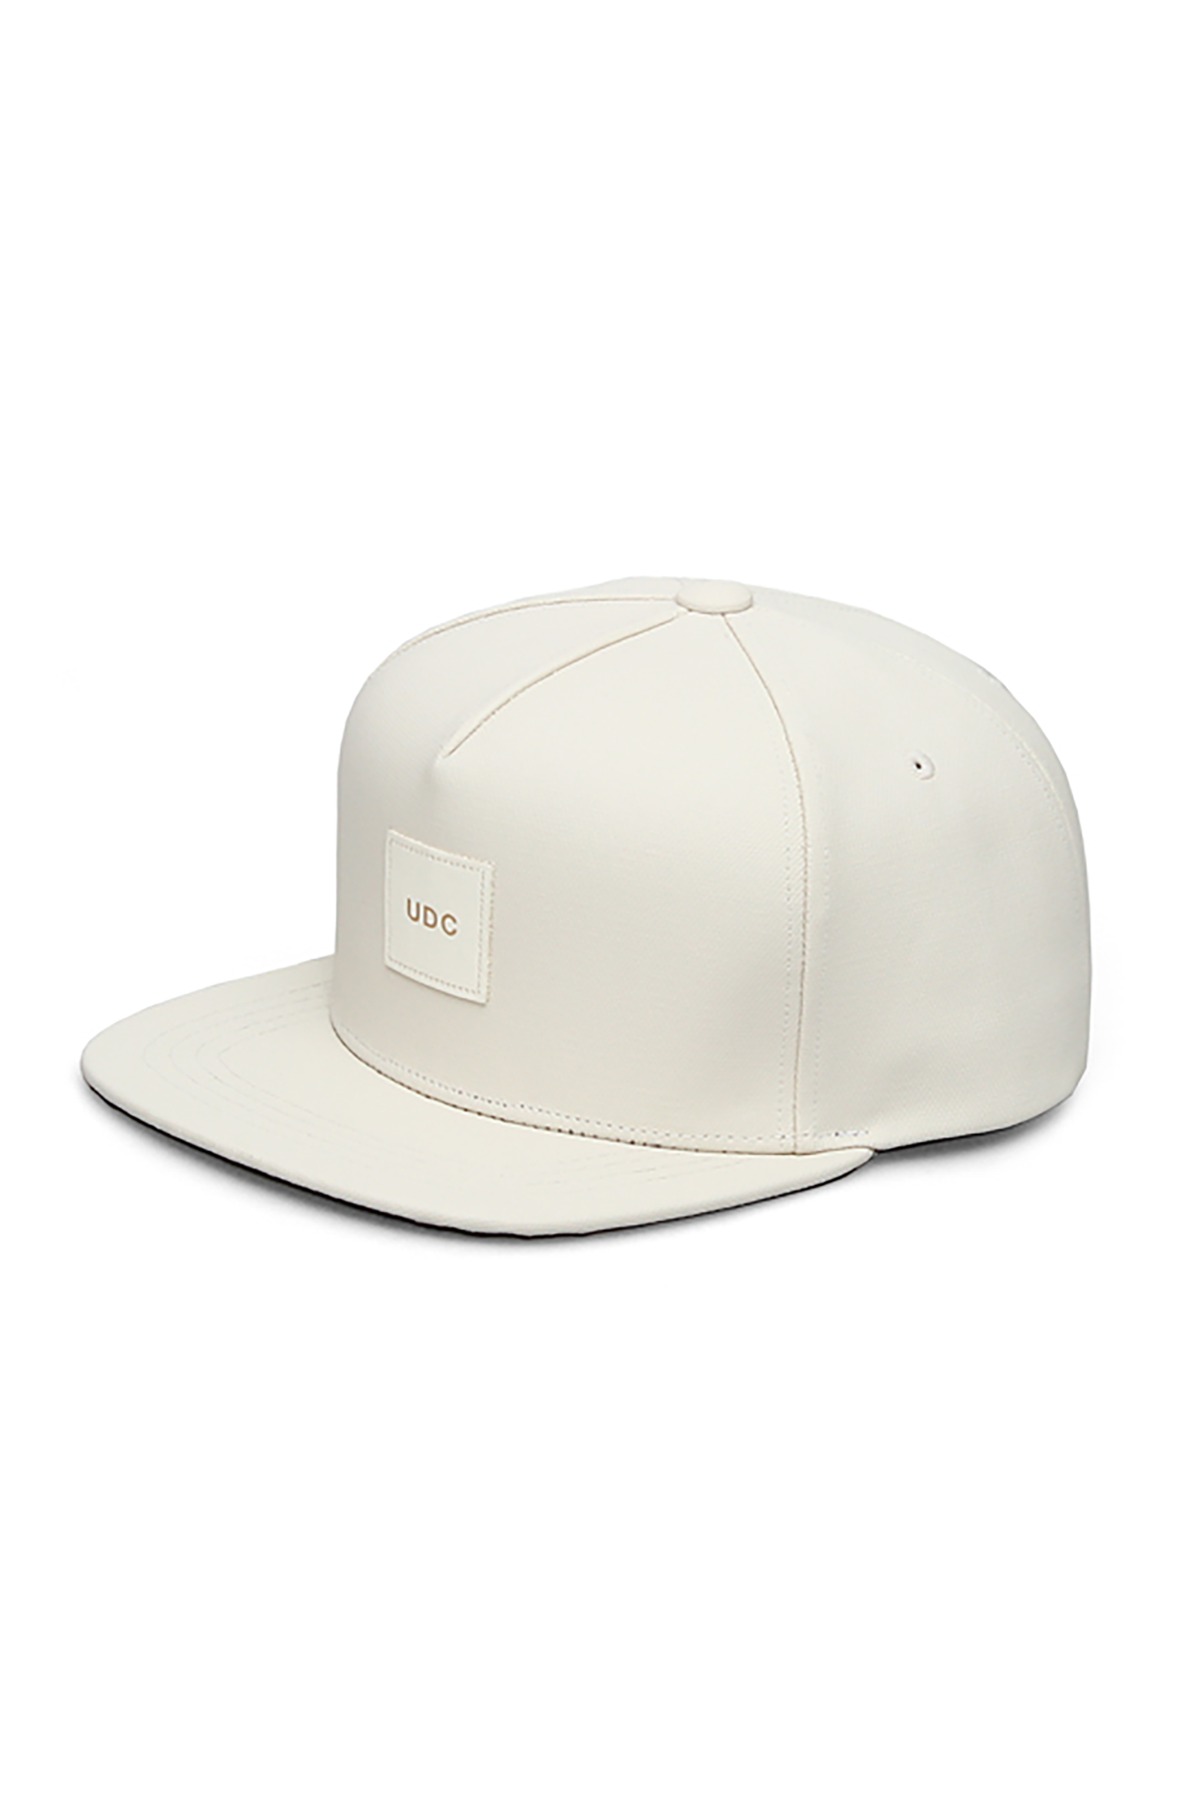 SWEETCH / COATED CANVAS / PURE WHITE